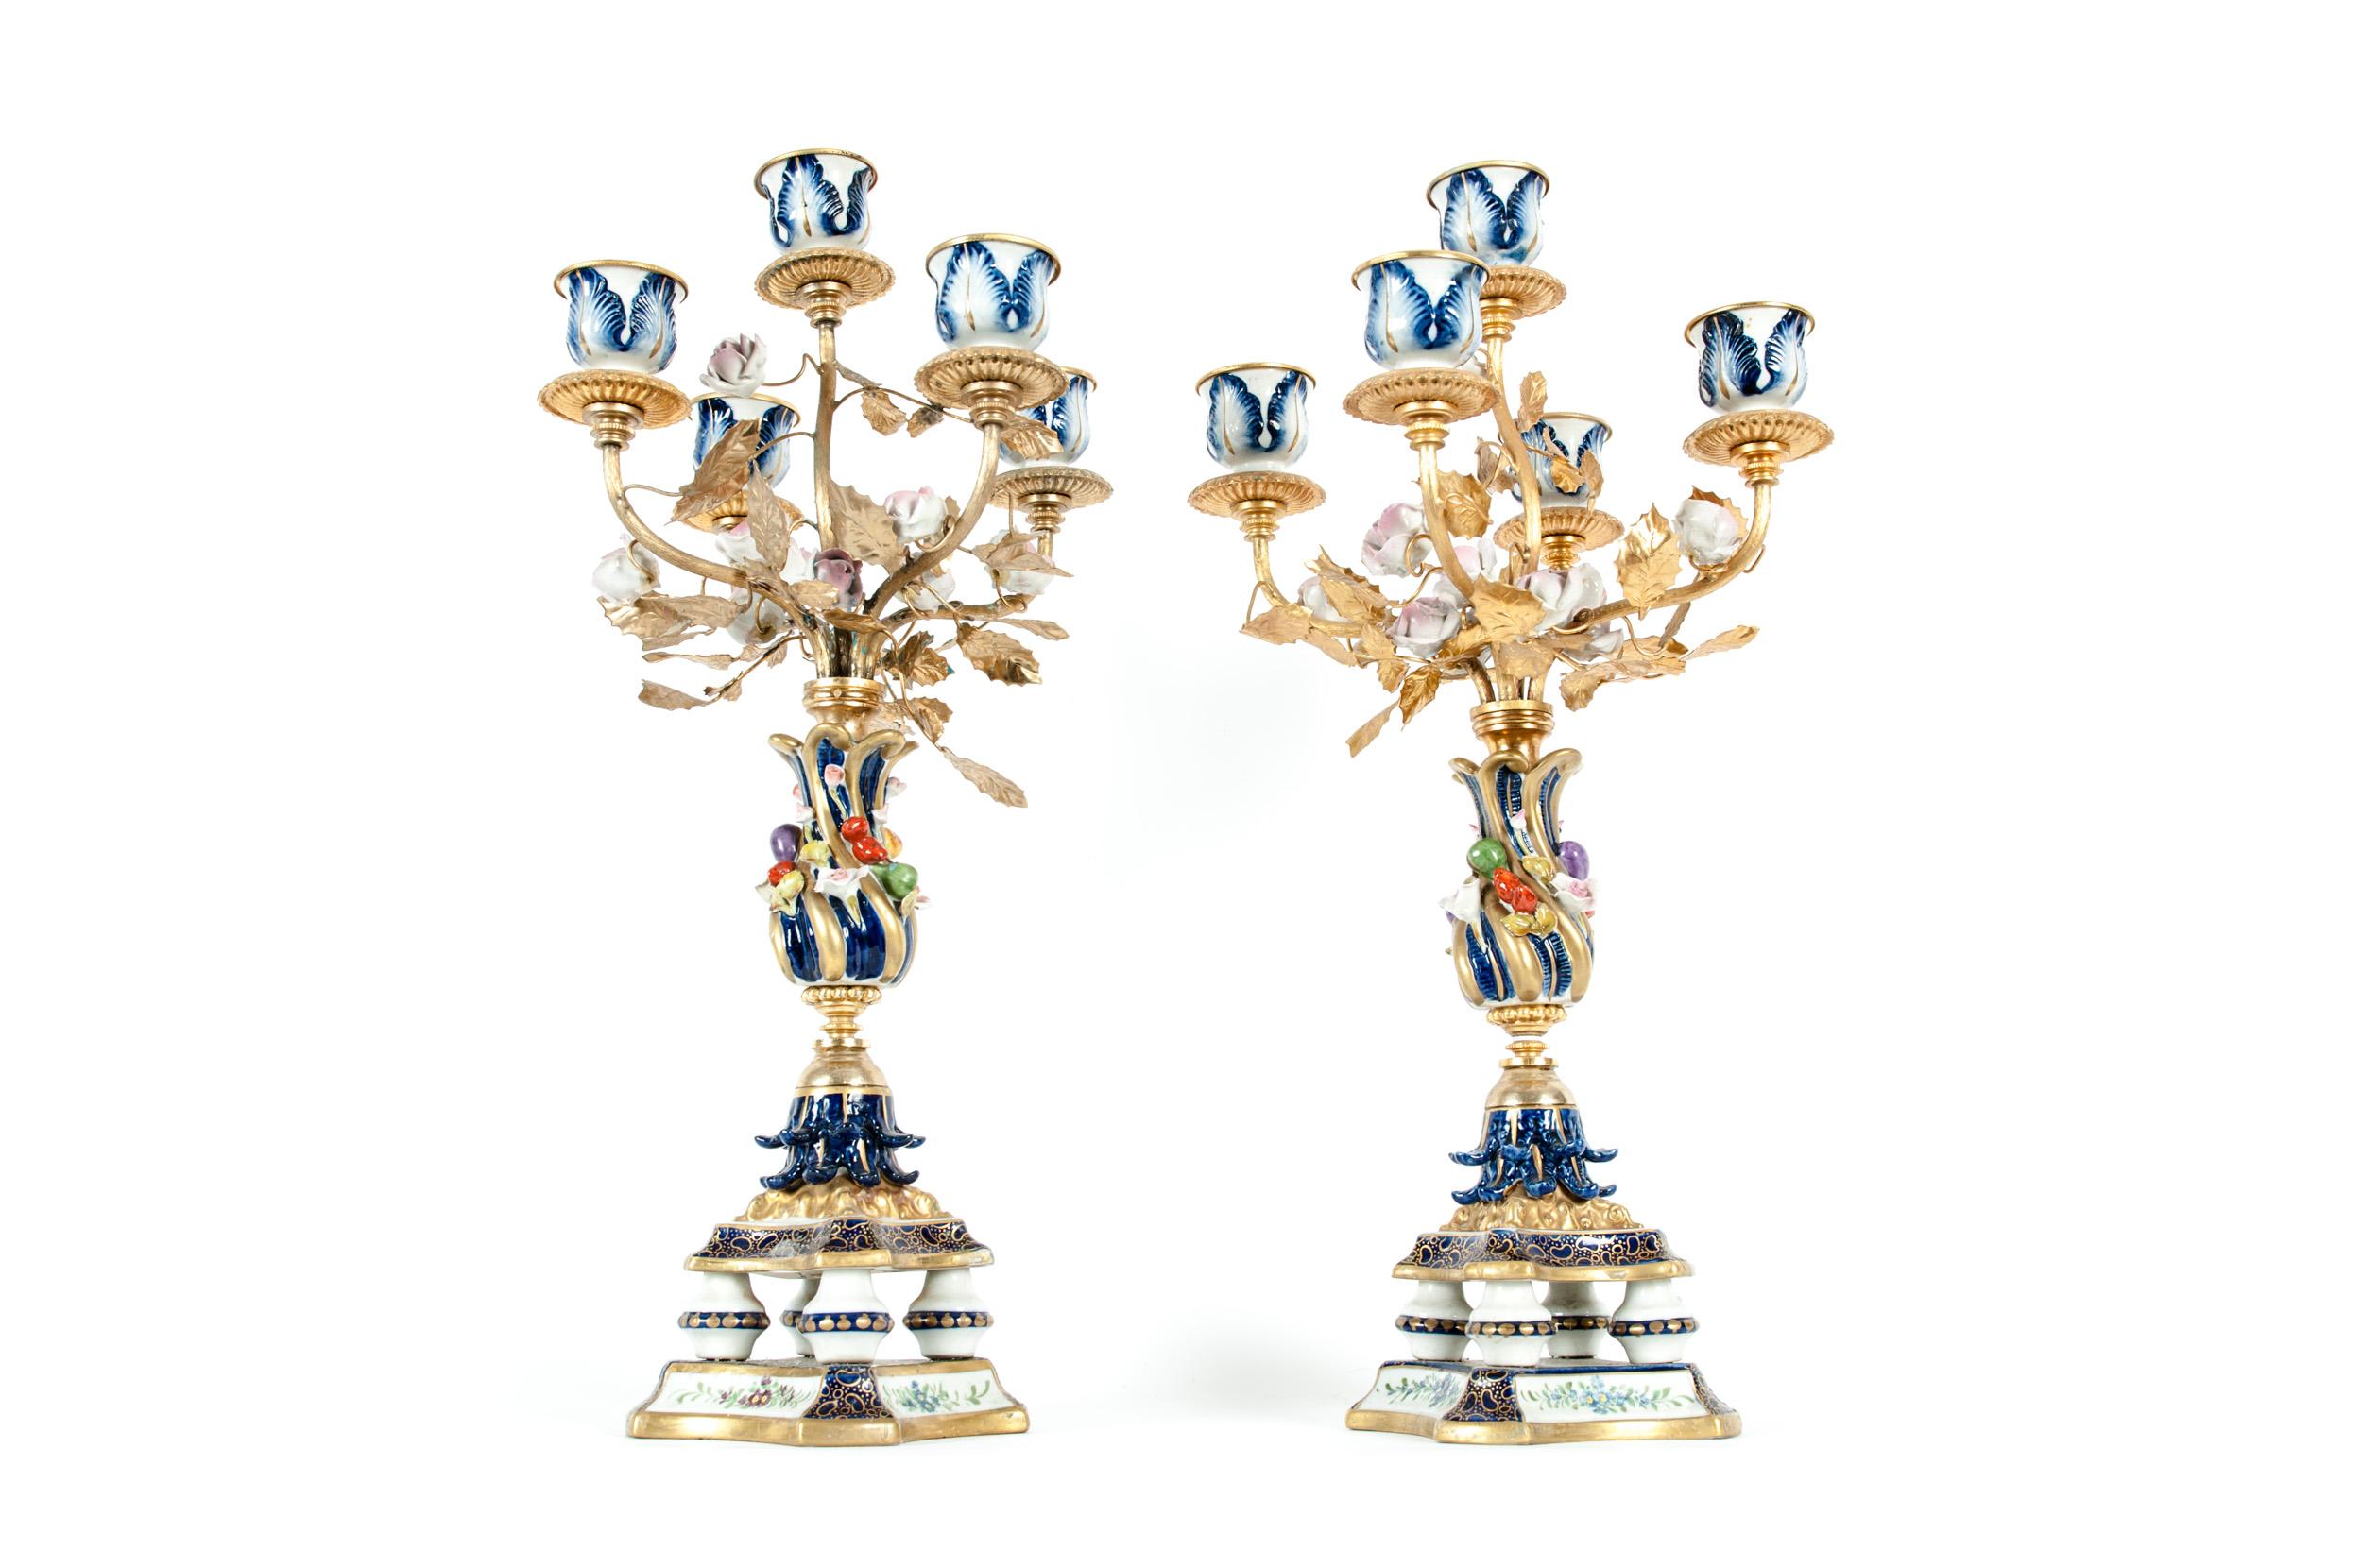 Very fine pair of Sèvres porcelain five arms candelabra with floral design details. Each candelabra is in great antique condition. Minor wear appropriate to age / use. Maker's mark undersigned. Each one measure about 18 inches high x 9 inches